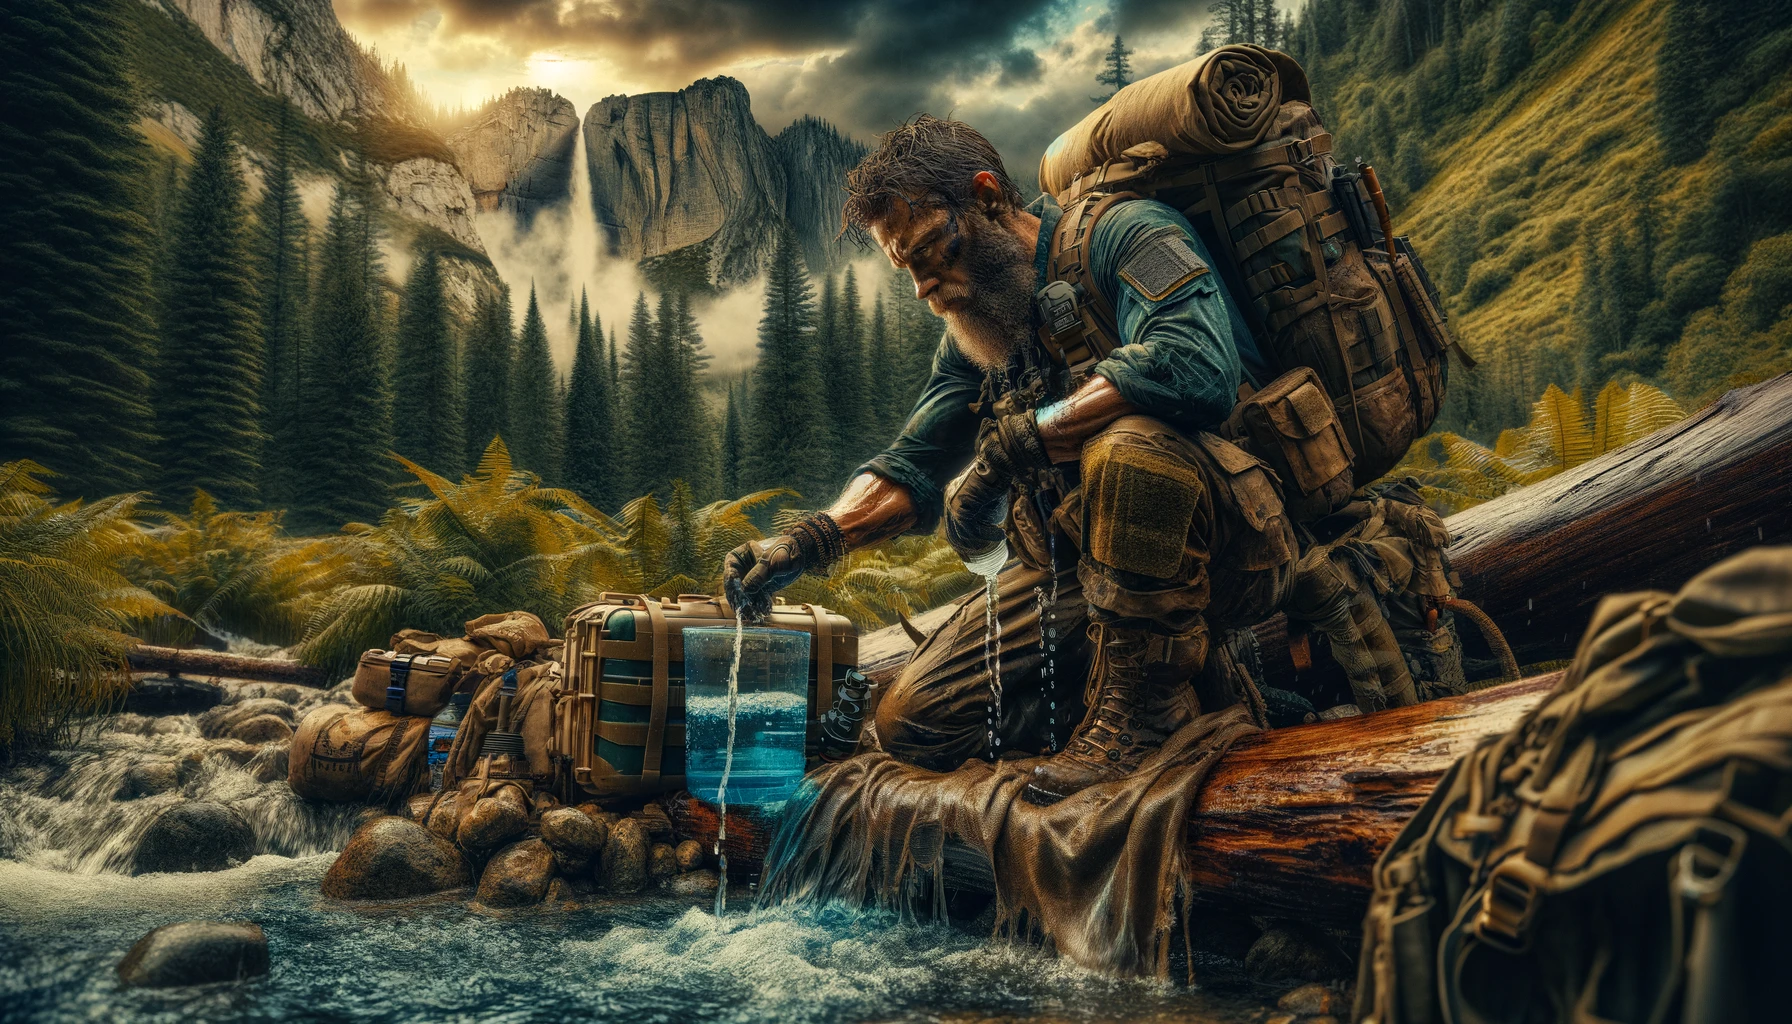 Epic wilderness survival scene with a rugged prepper employing advanced hydration techniques, including dew collection and water purification, in a rich, challenging natural environment, embodying self-reliance, the critical importance of hydration, and the prepper ethos of preparedness and resilience